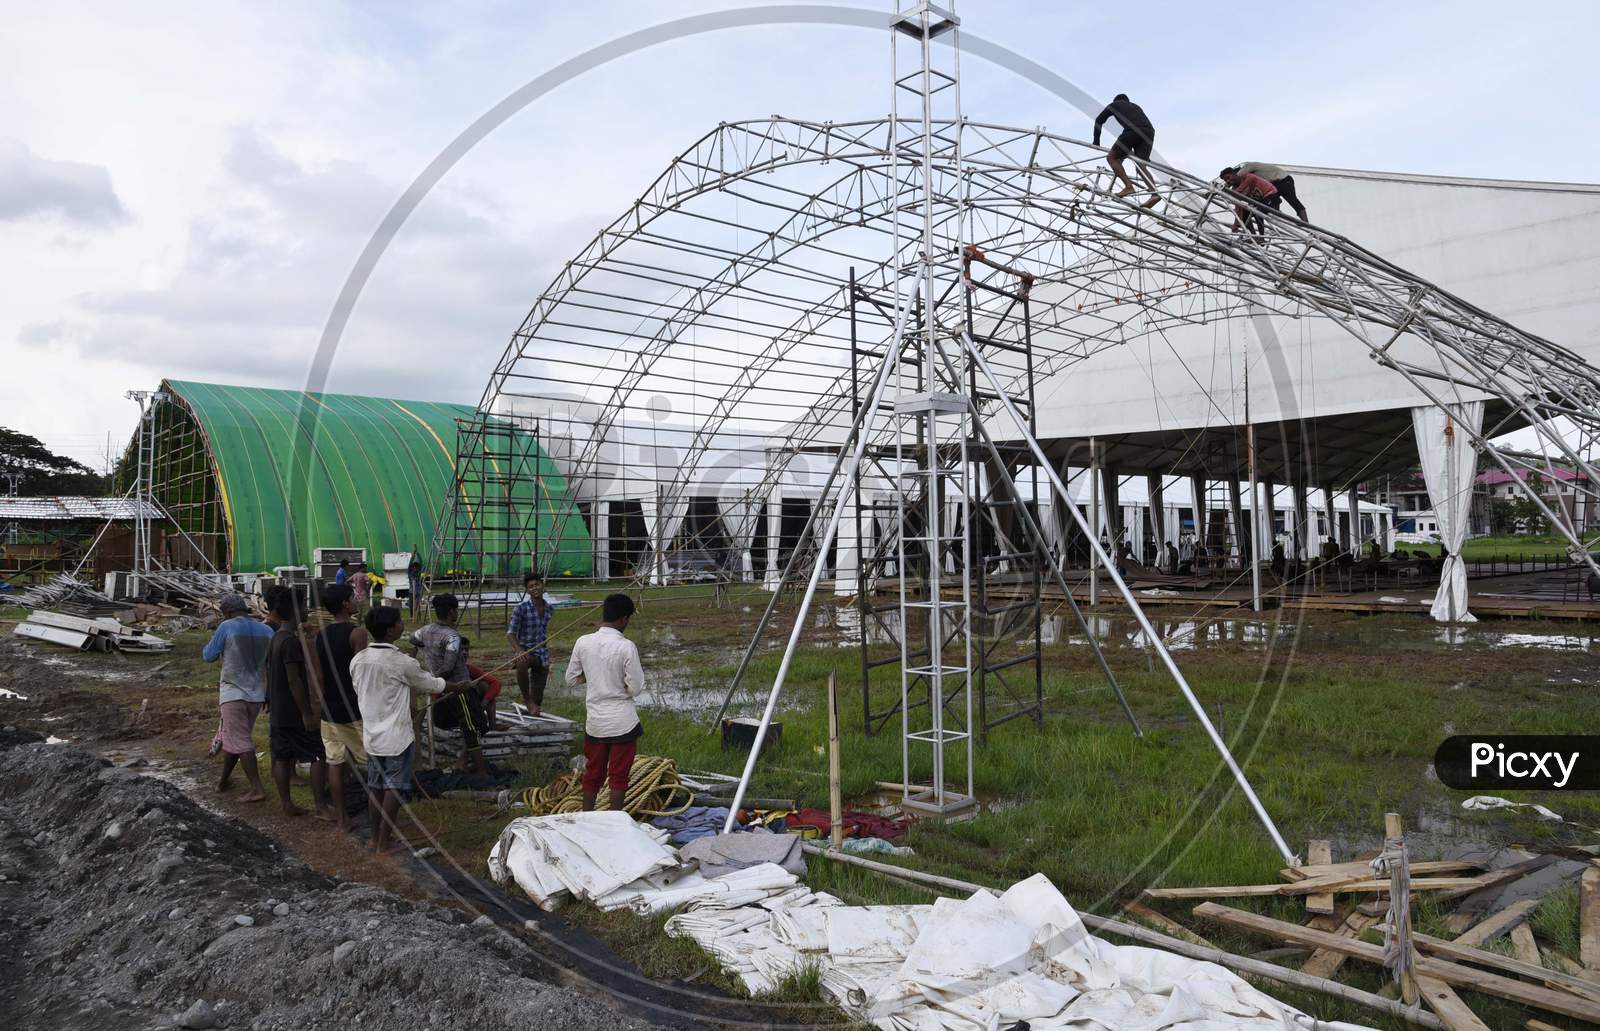 Workers build a quarantine center for treating COVID-19 patients